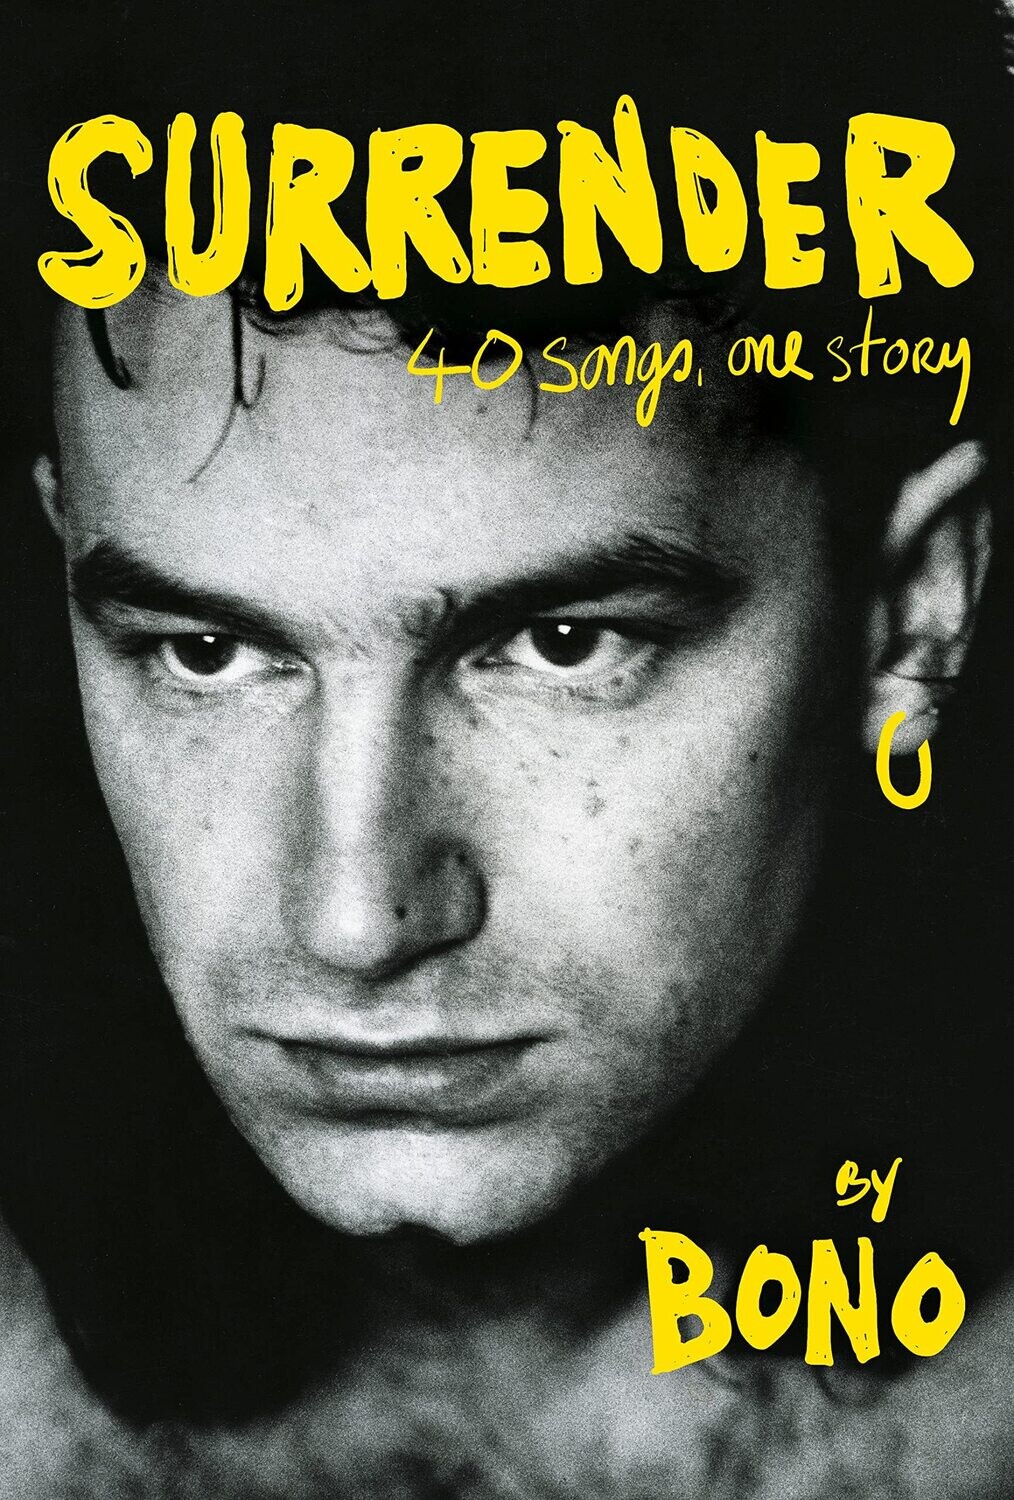 Surrender: 40 Songs, One Story by Bono (Hardcover, NEW)